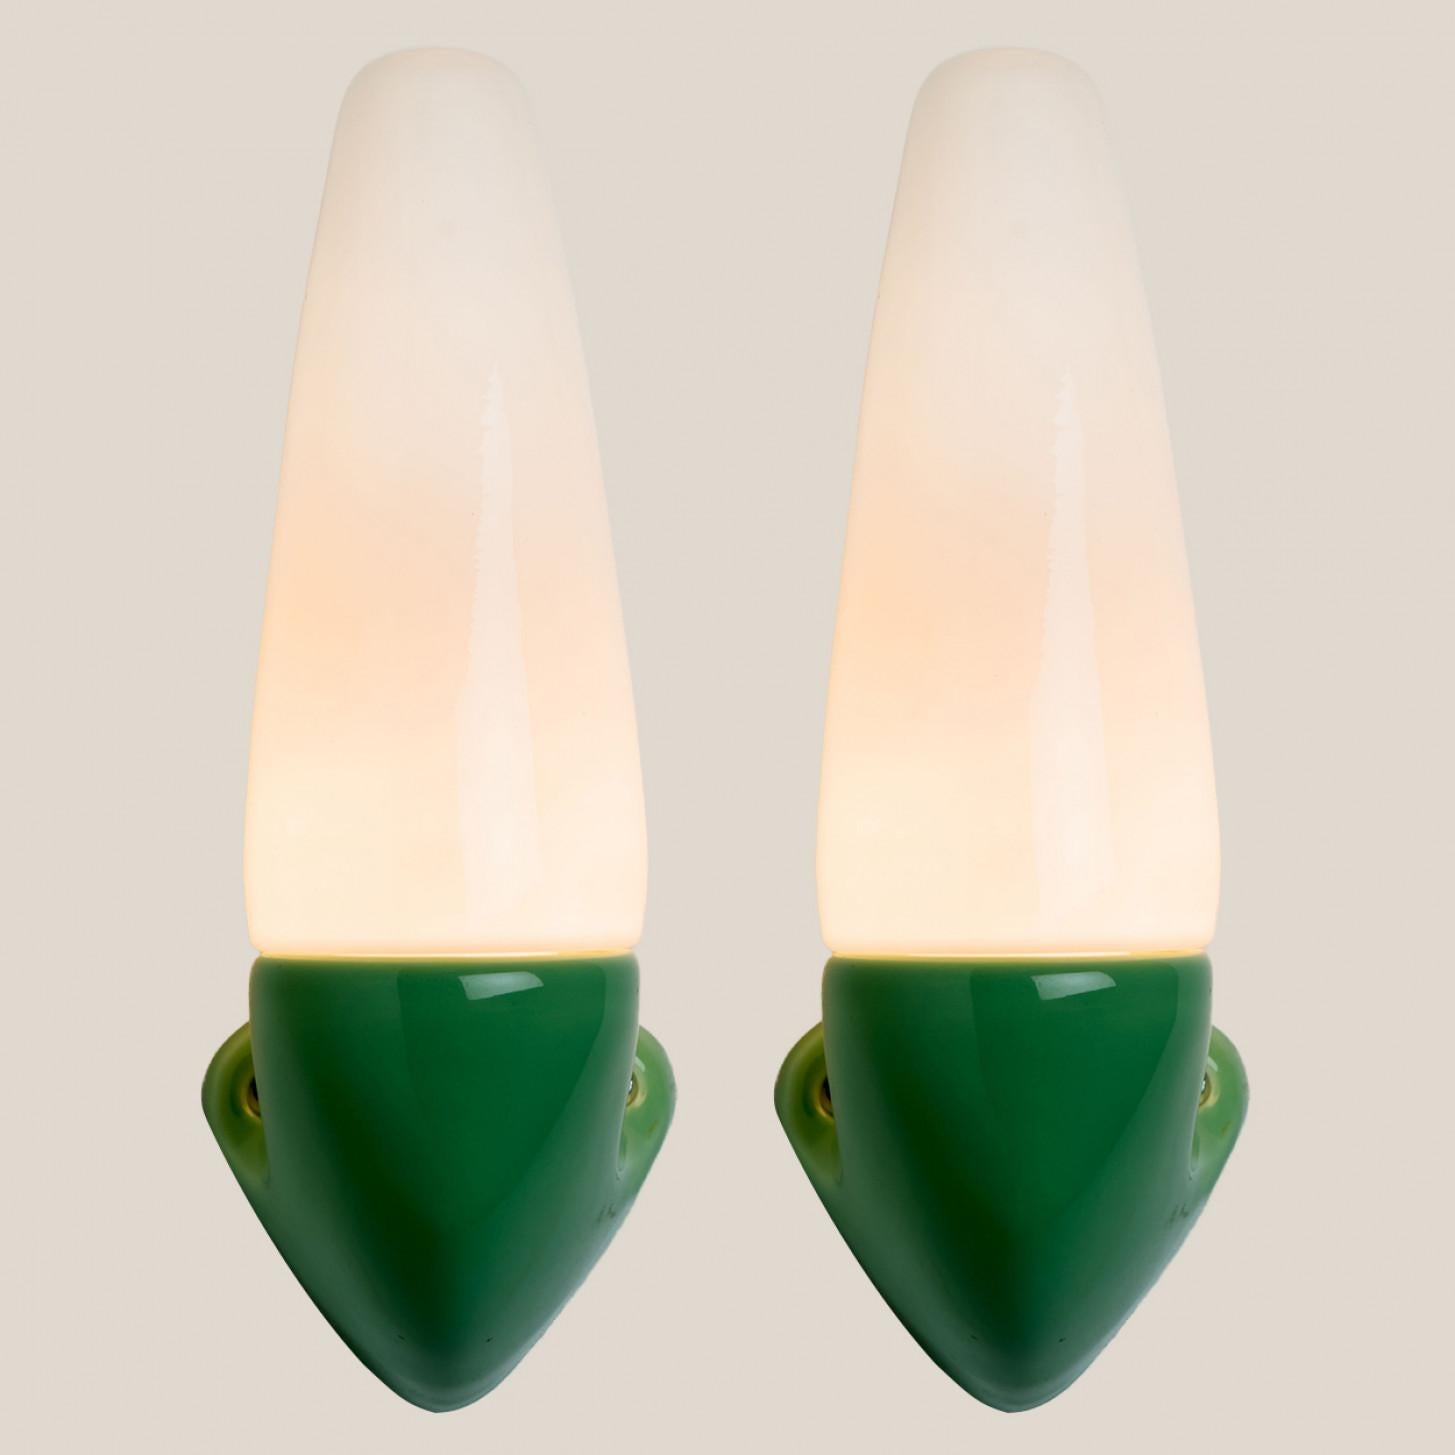 Pair of Green Ceramic Wall Lights, Sigvard Bernadotte, 1970 For Sale 4